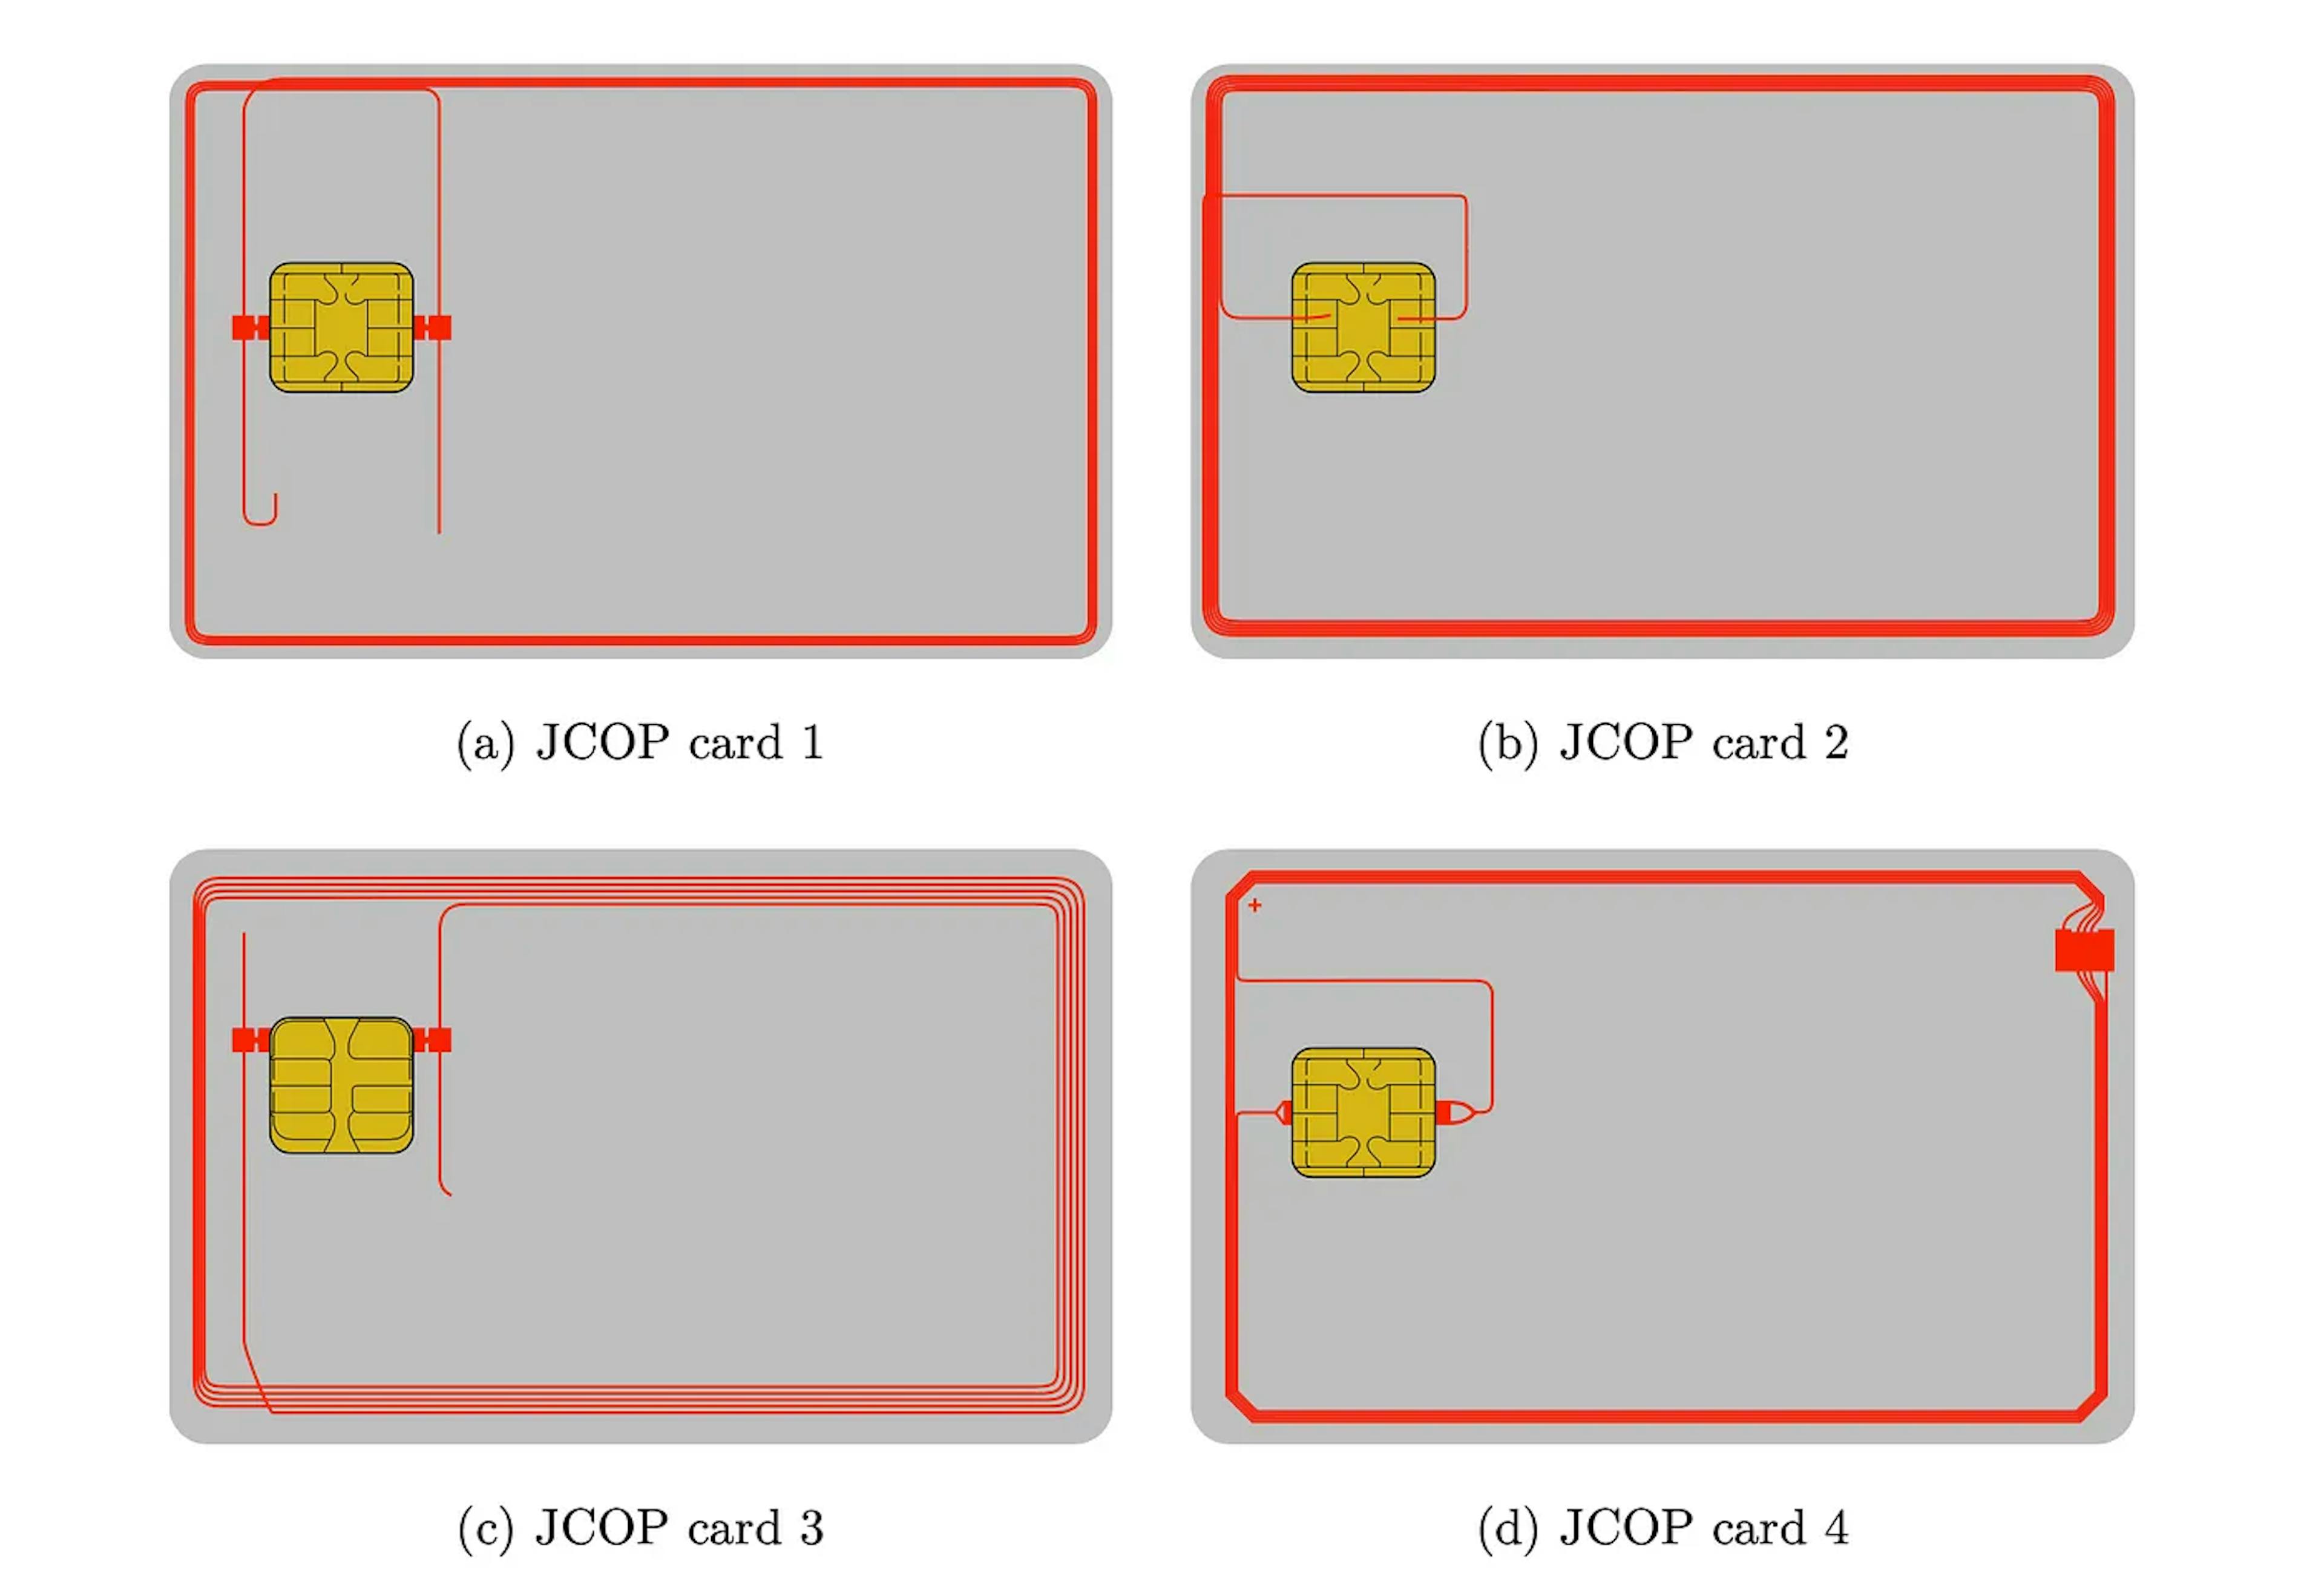 A variety of microchip + antenna designs of contactless payment cards